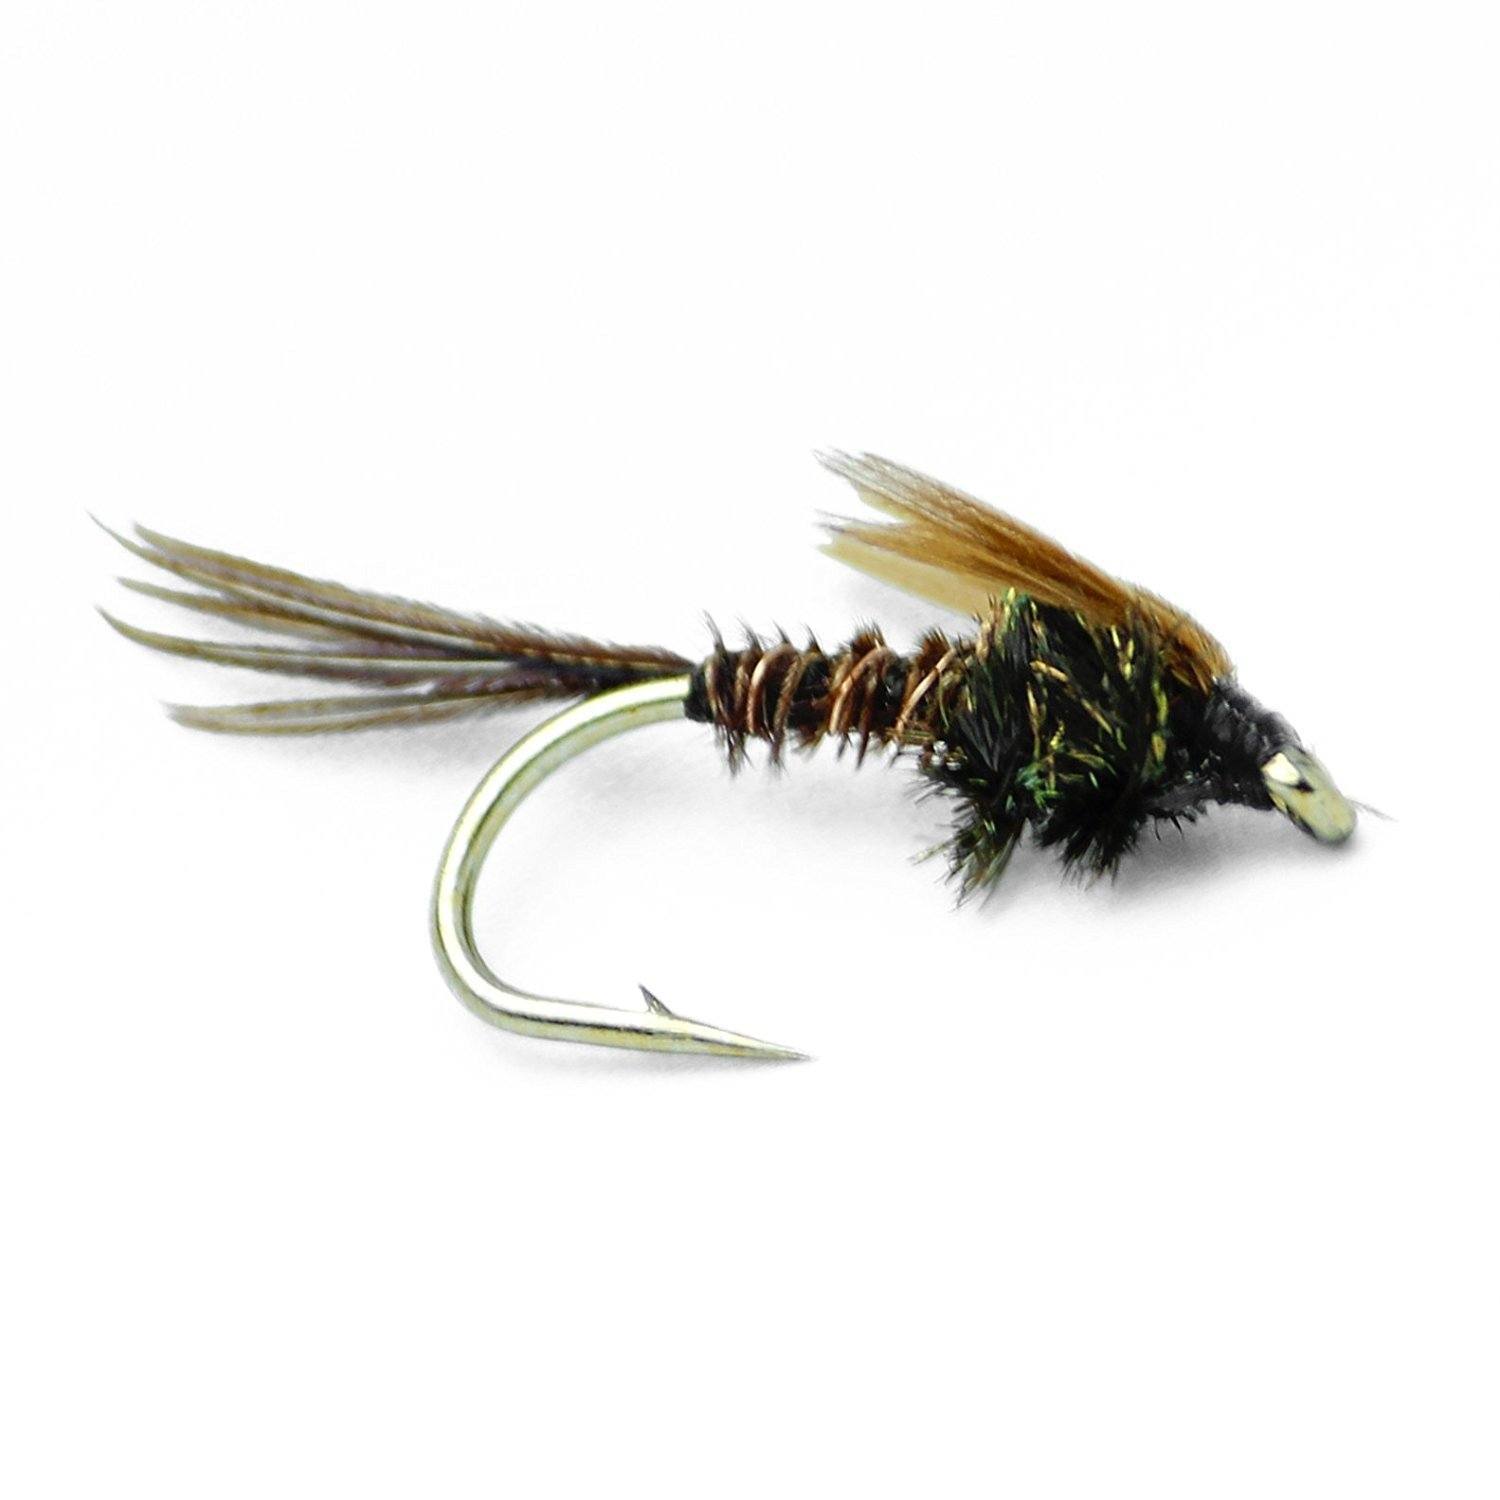 Hair & Feather Hand Tied Fly Fishing Flies/Nymphs Fishing Lures